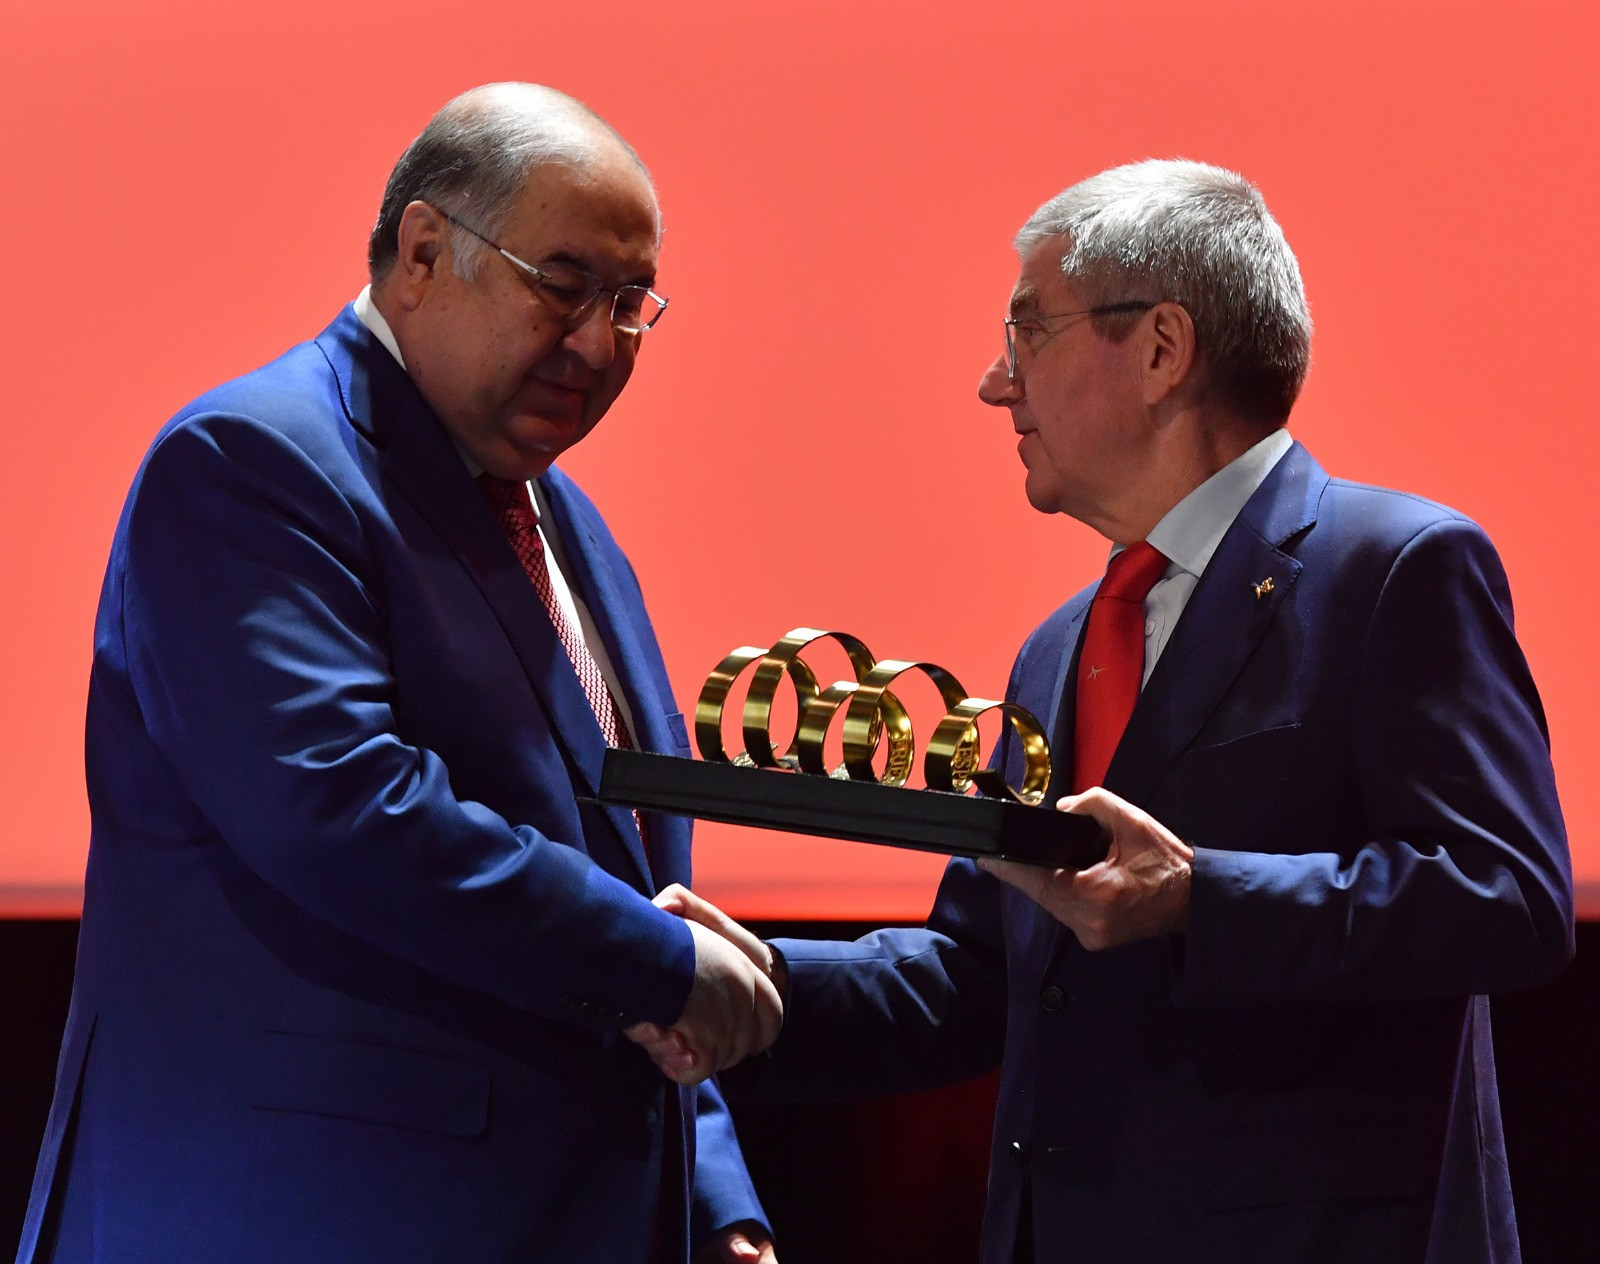 Alisher Usmanov, left, and International Olympic Committee President Thomas Bach, right, each presented one another with awards at the FIE Congress in Lausanne ©FIE